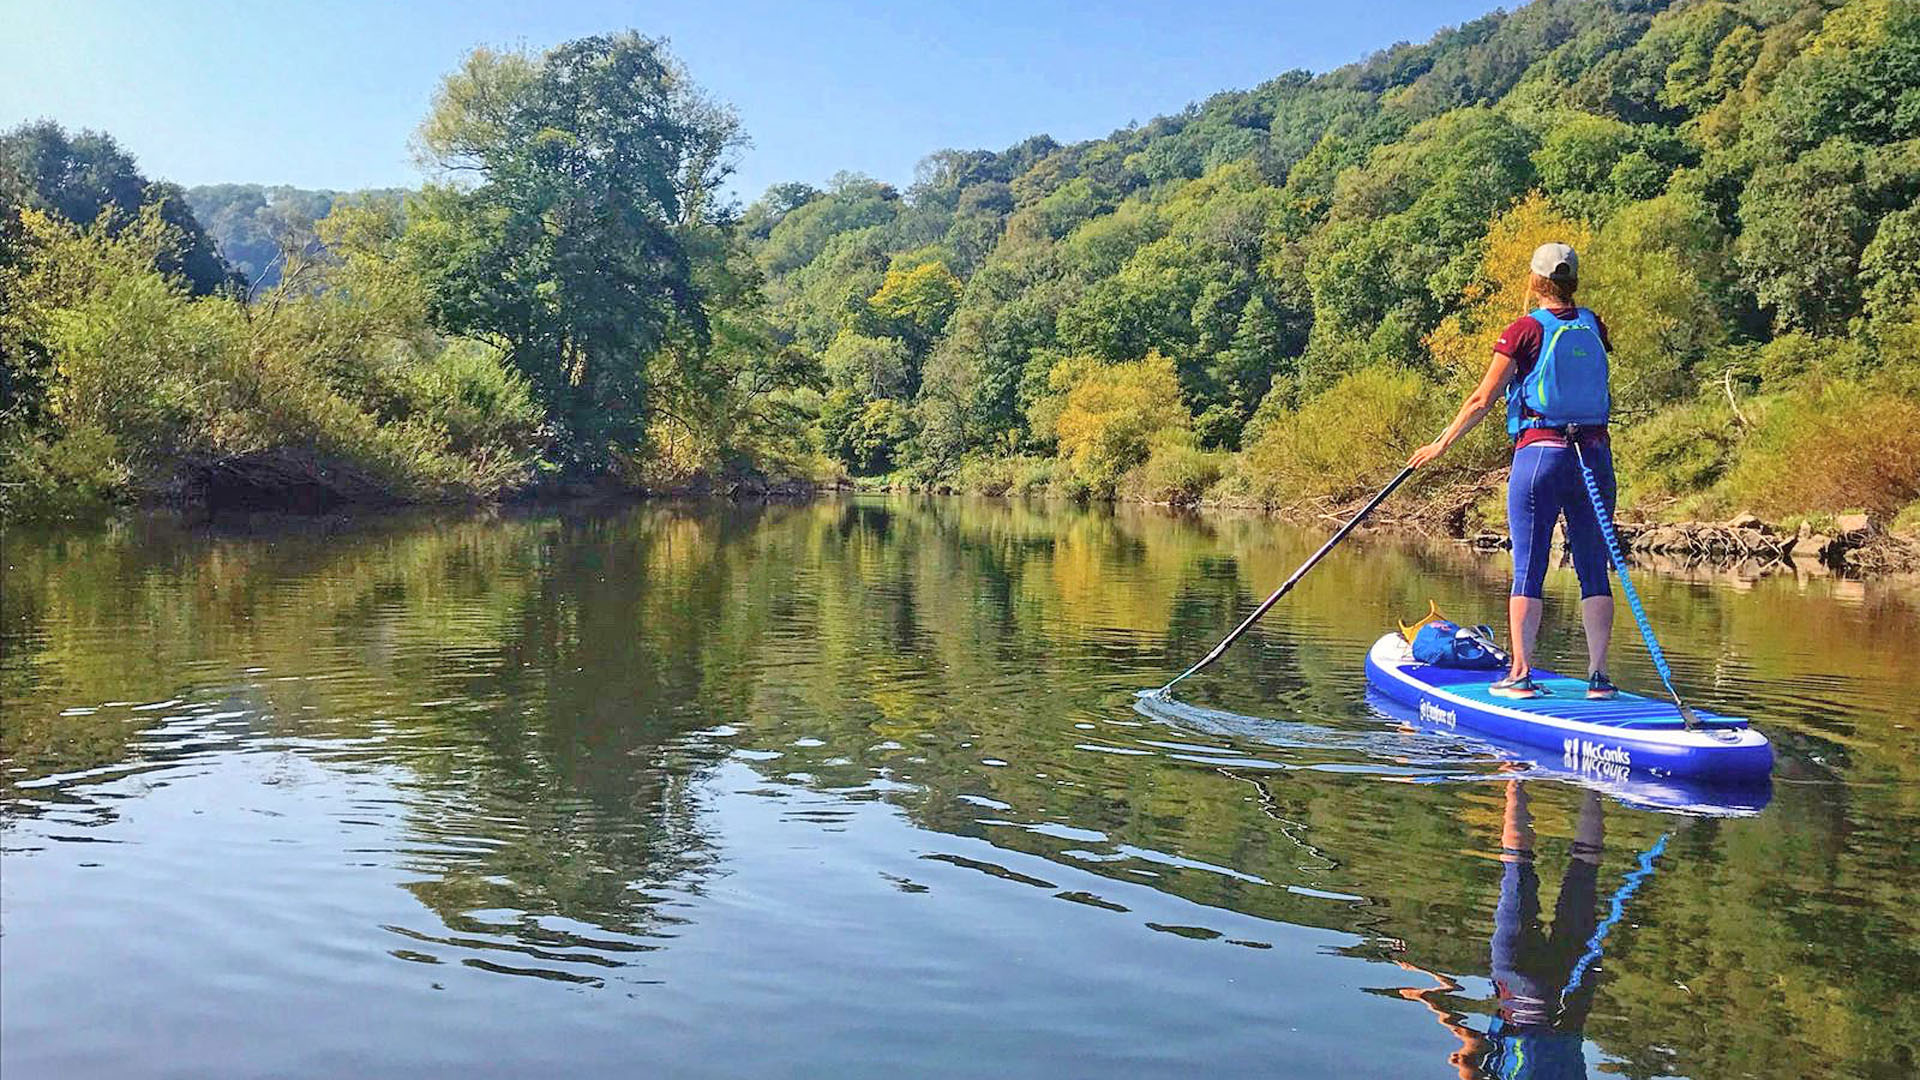 Paddleboarding in Wye Valley